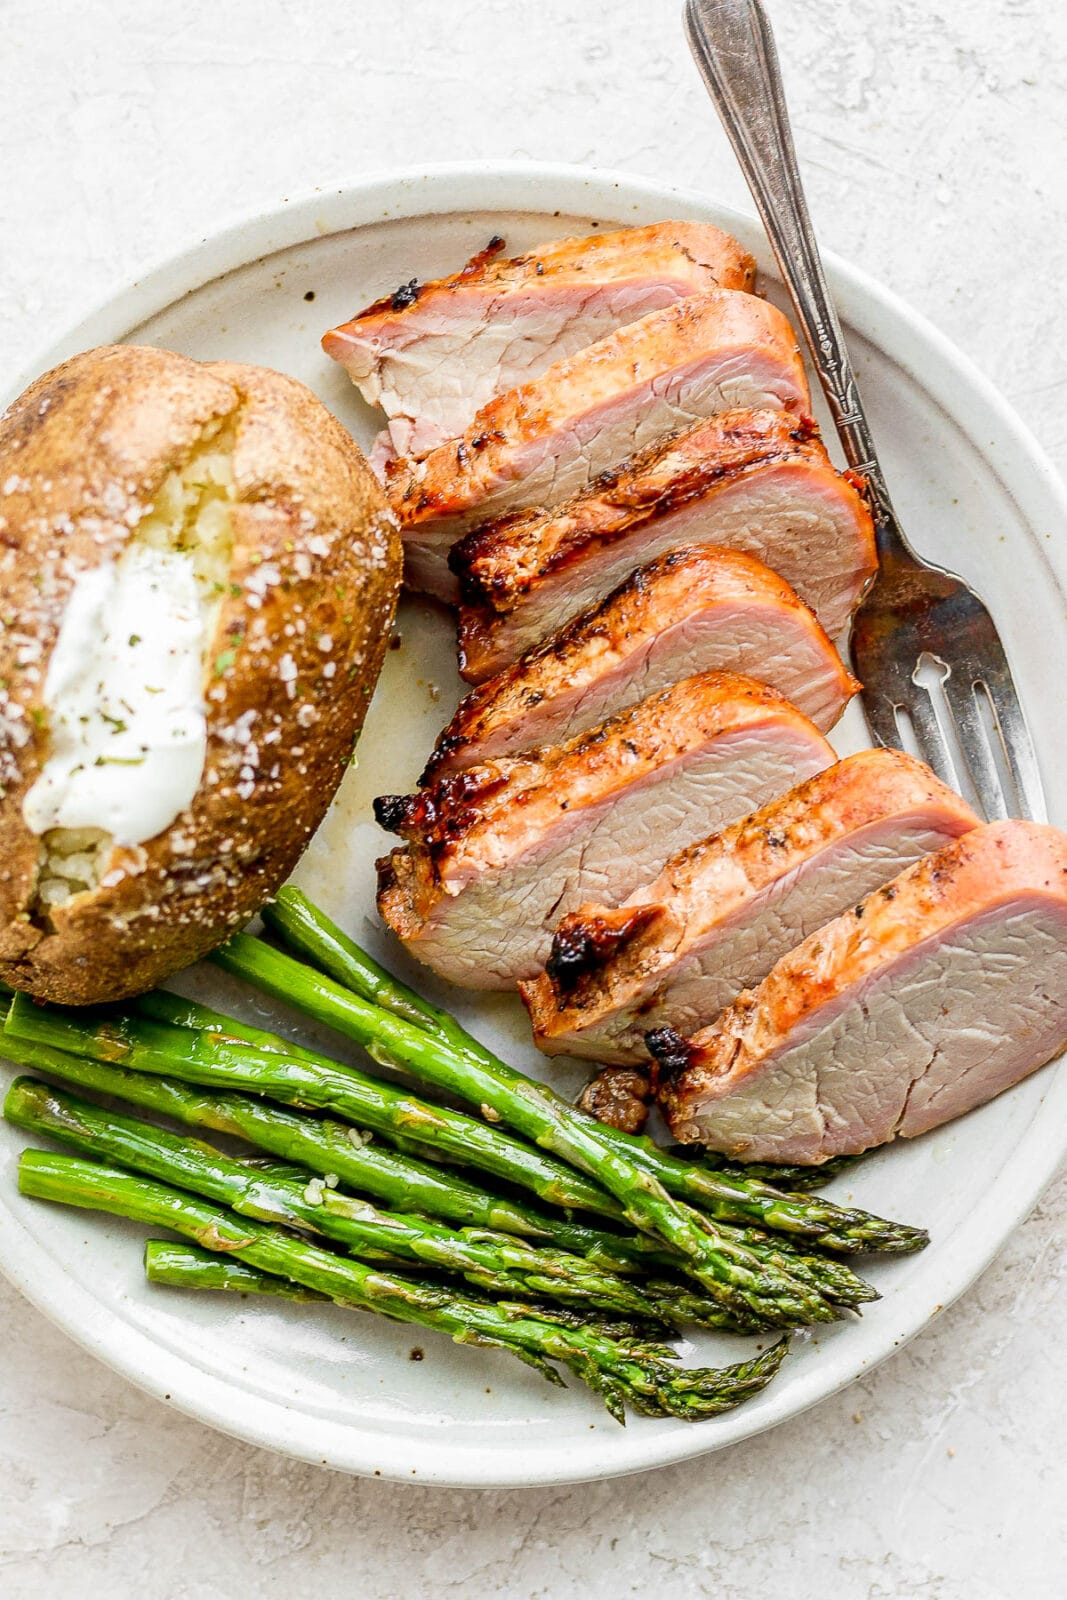 A smoked pork tenderloin on a plate with asparagus and a baked potato. 